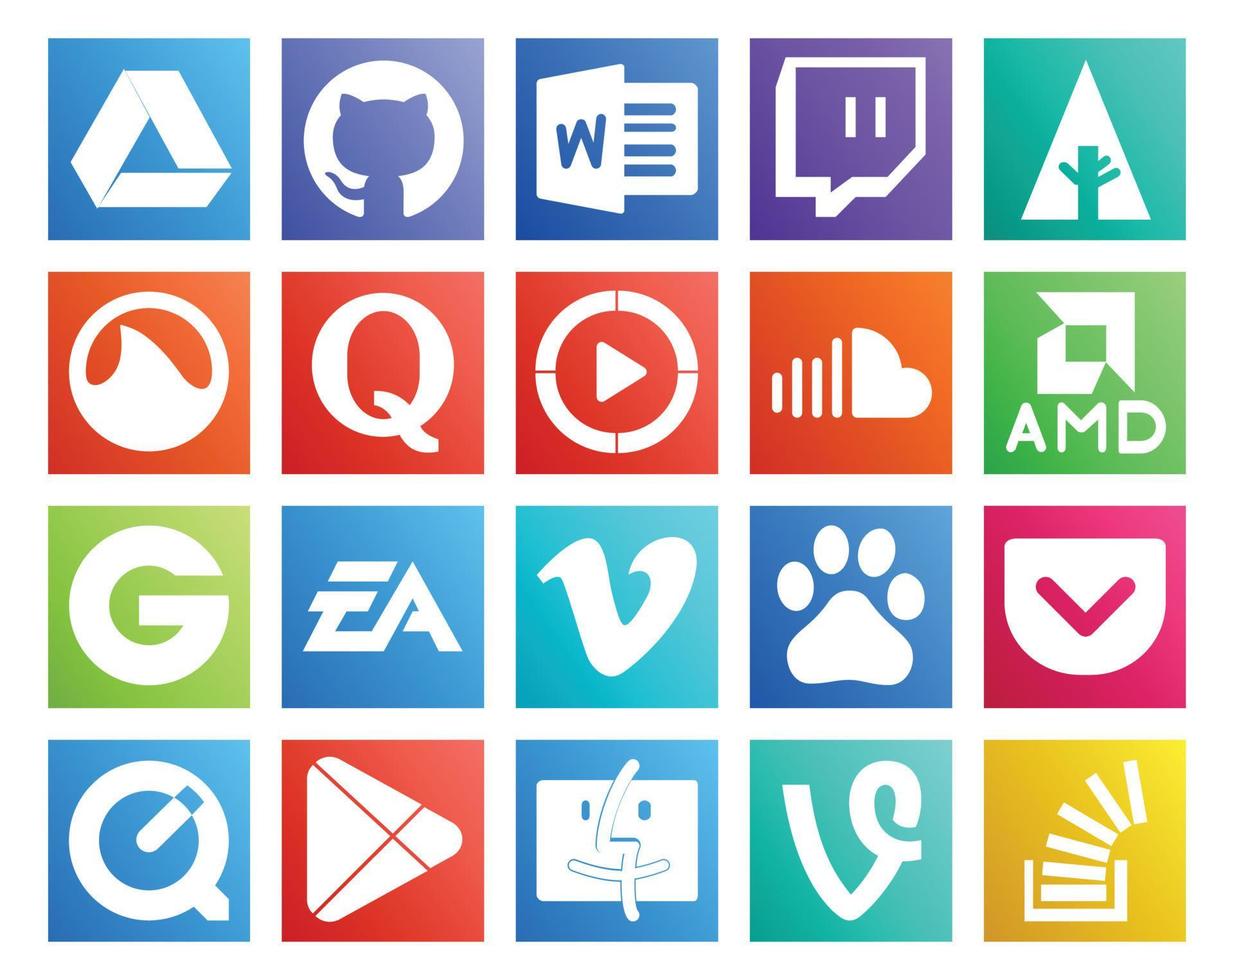 20 Social Media Icon Pack Including sports electronics arts windows media player groupon music vector